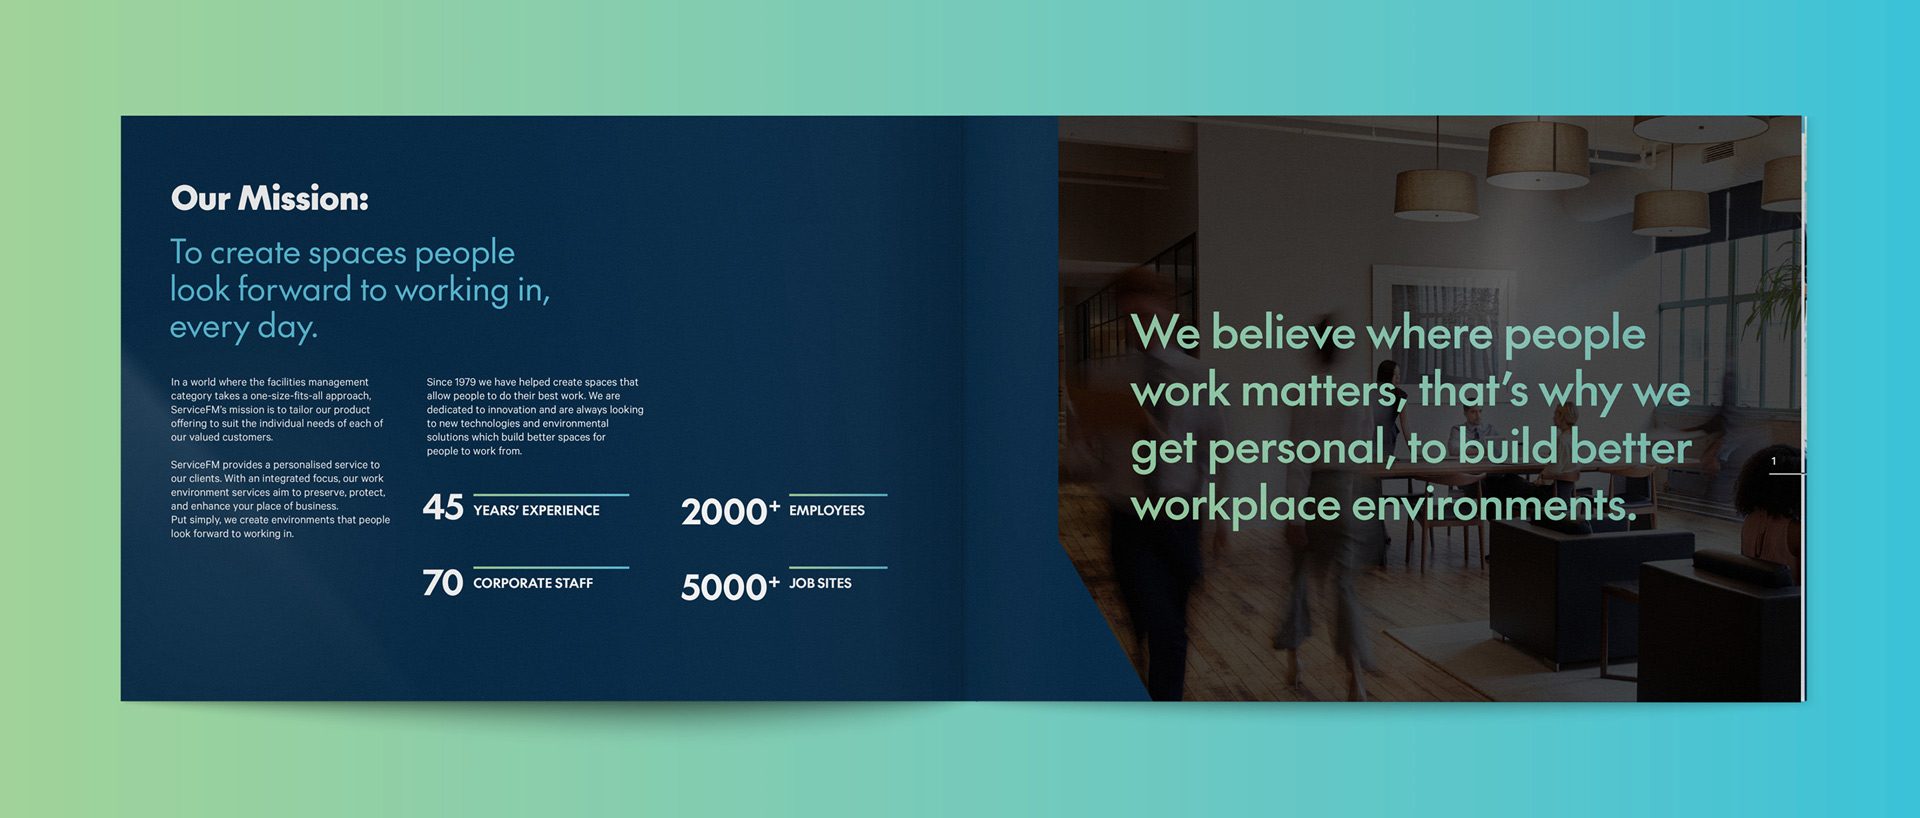 We believe where people work matters, that's why we get personal, to build better workplace environments